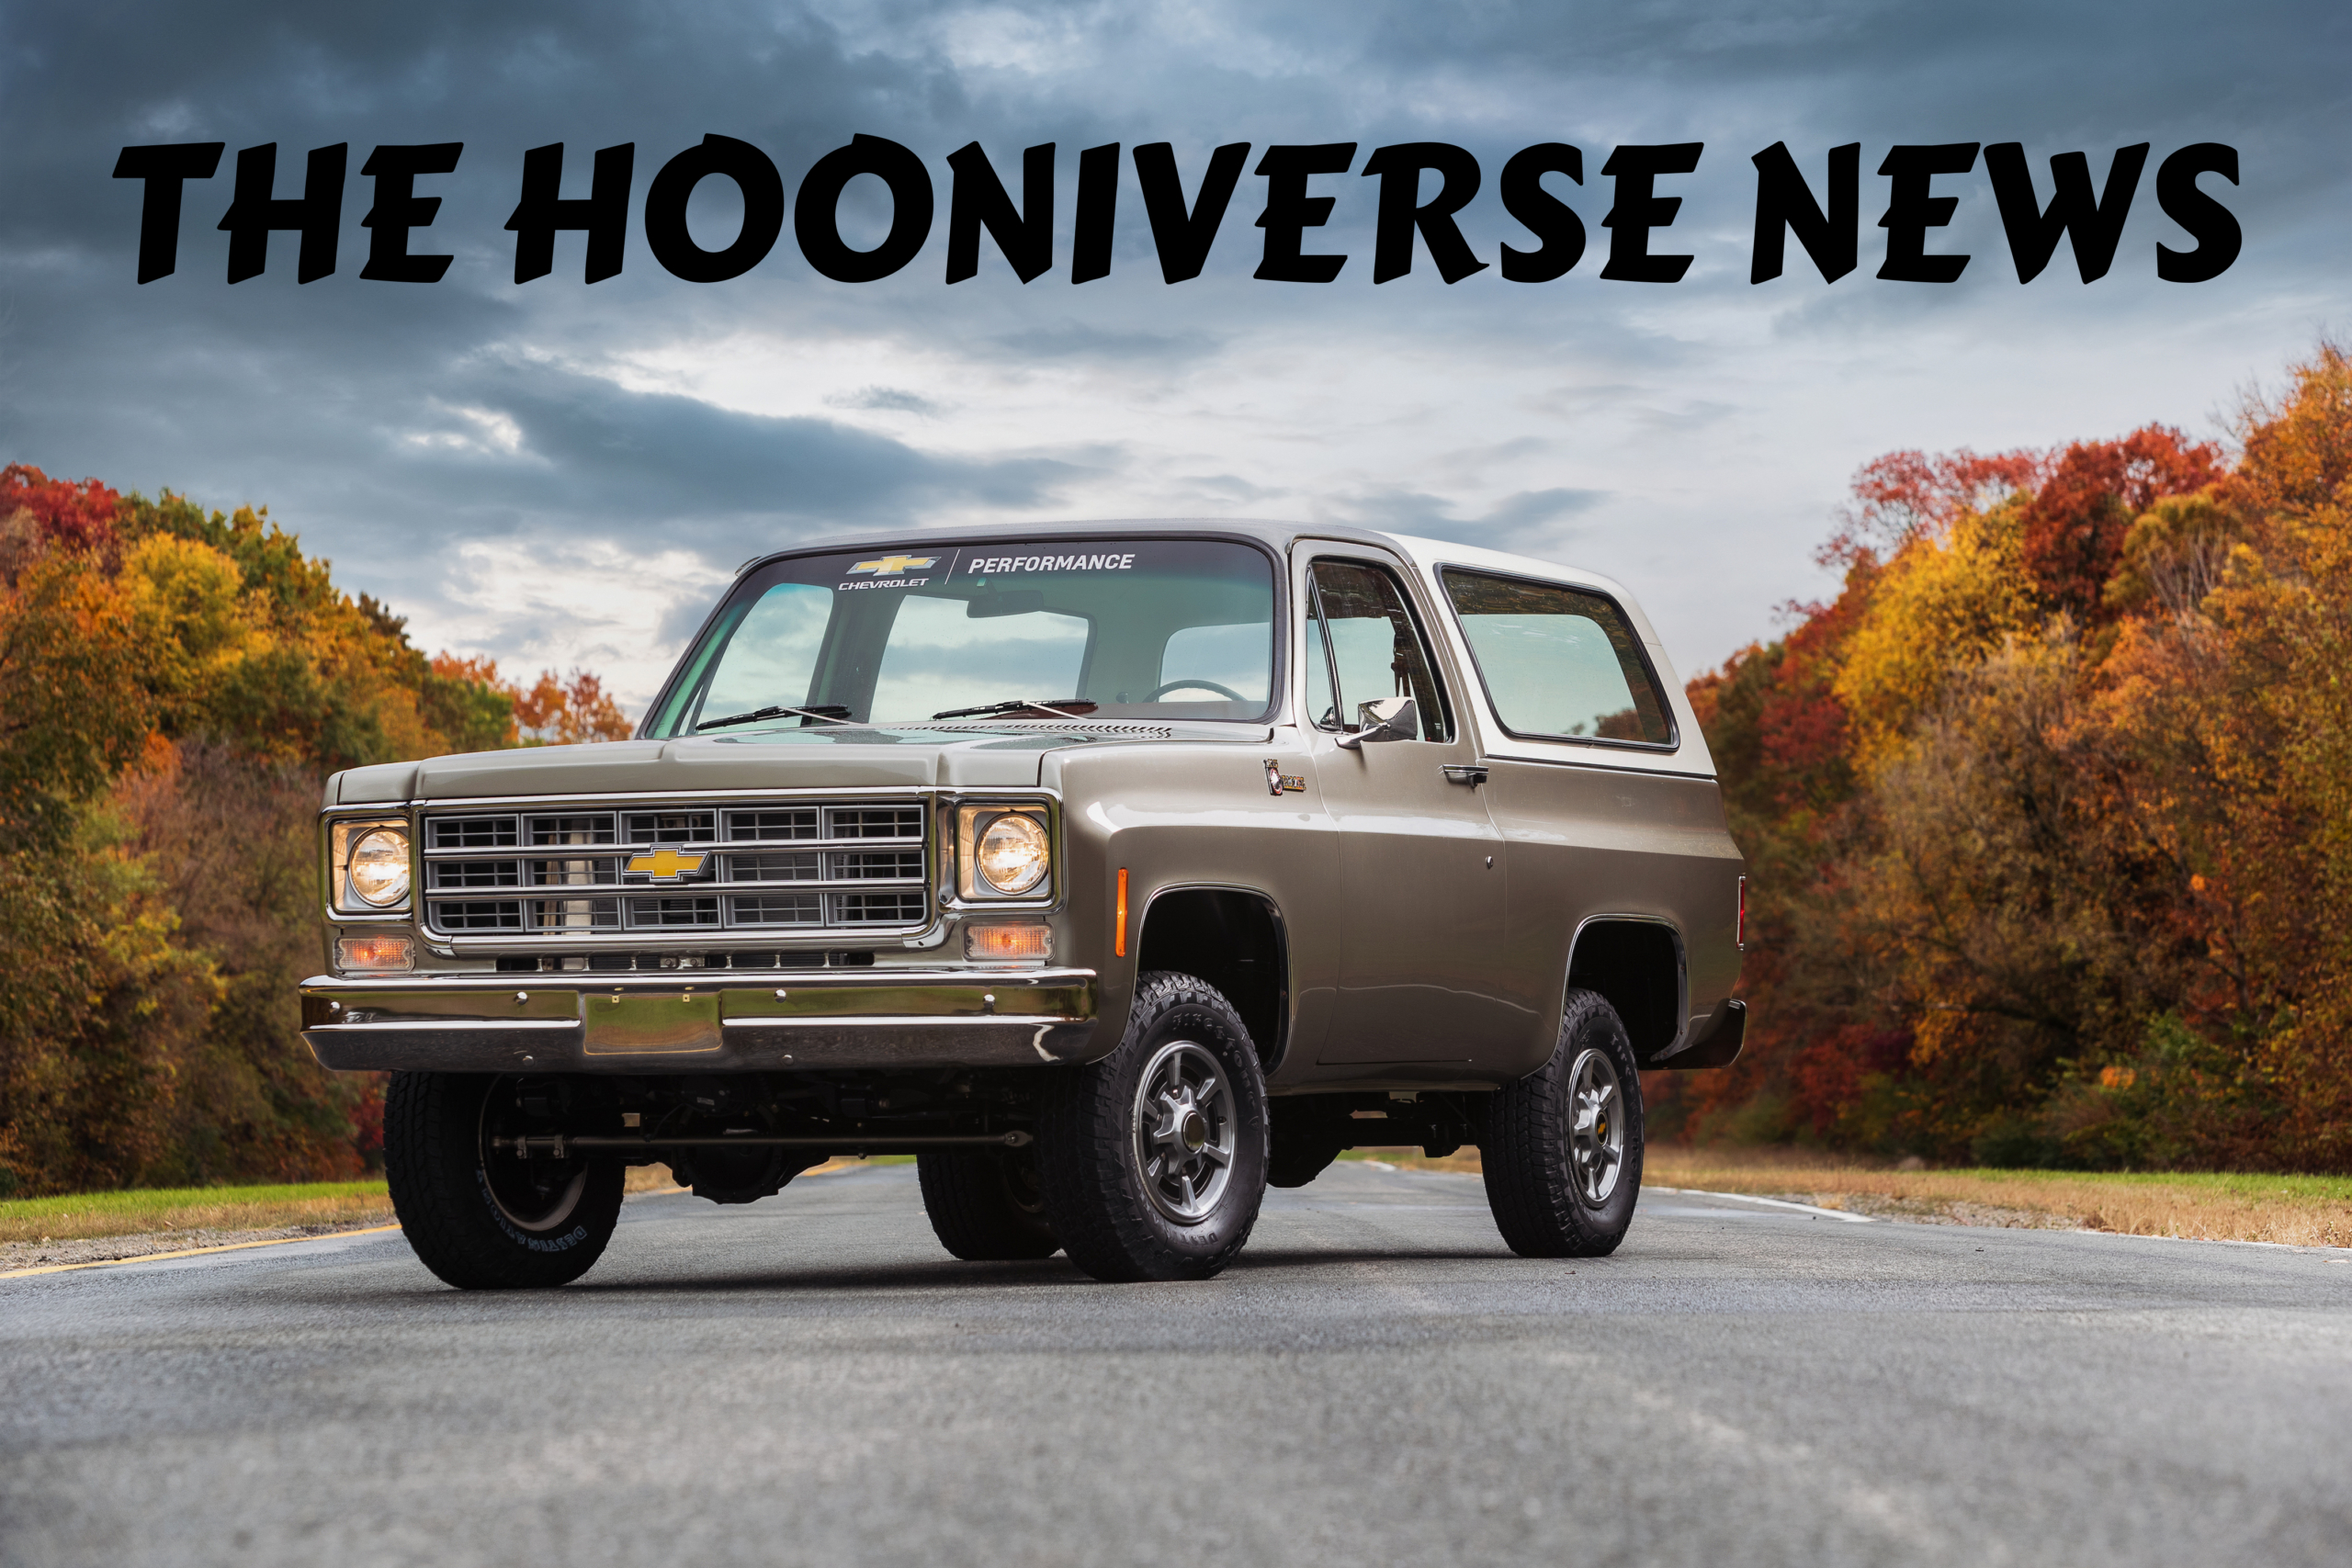 Chevrolet will showcase a 1977 K5 Blazer converted to all-electric propulsion at SEMA360. The new K5 Blazer-E retains as much of the stock Blazer as possible and approximately 90 percent of the new parts installed for the eCrate package are factory components from the Chevrolet Bolt EV.